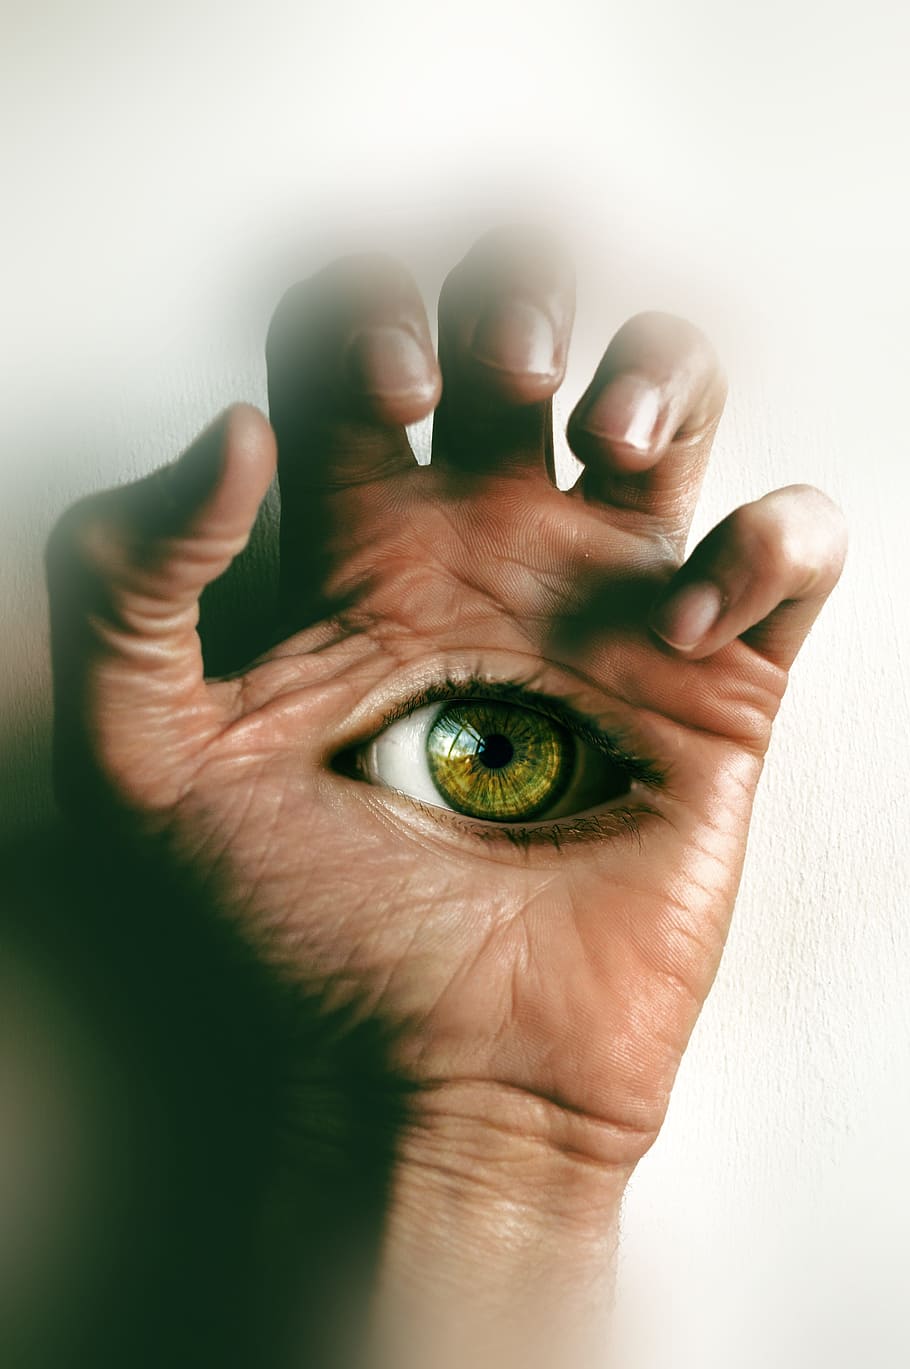 surrealism, hand, eye, fingers, eye open, one person, human body part, body part, human hand, indoors